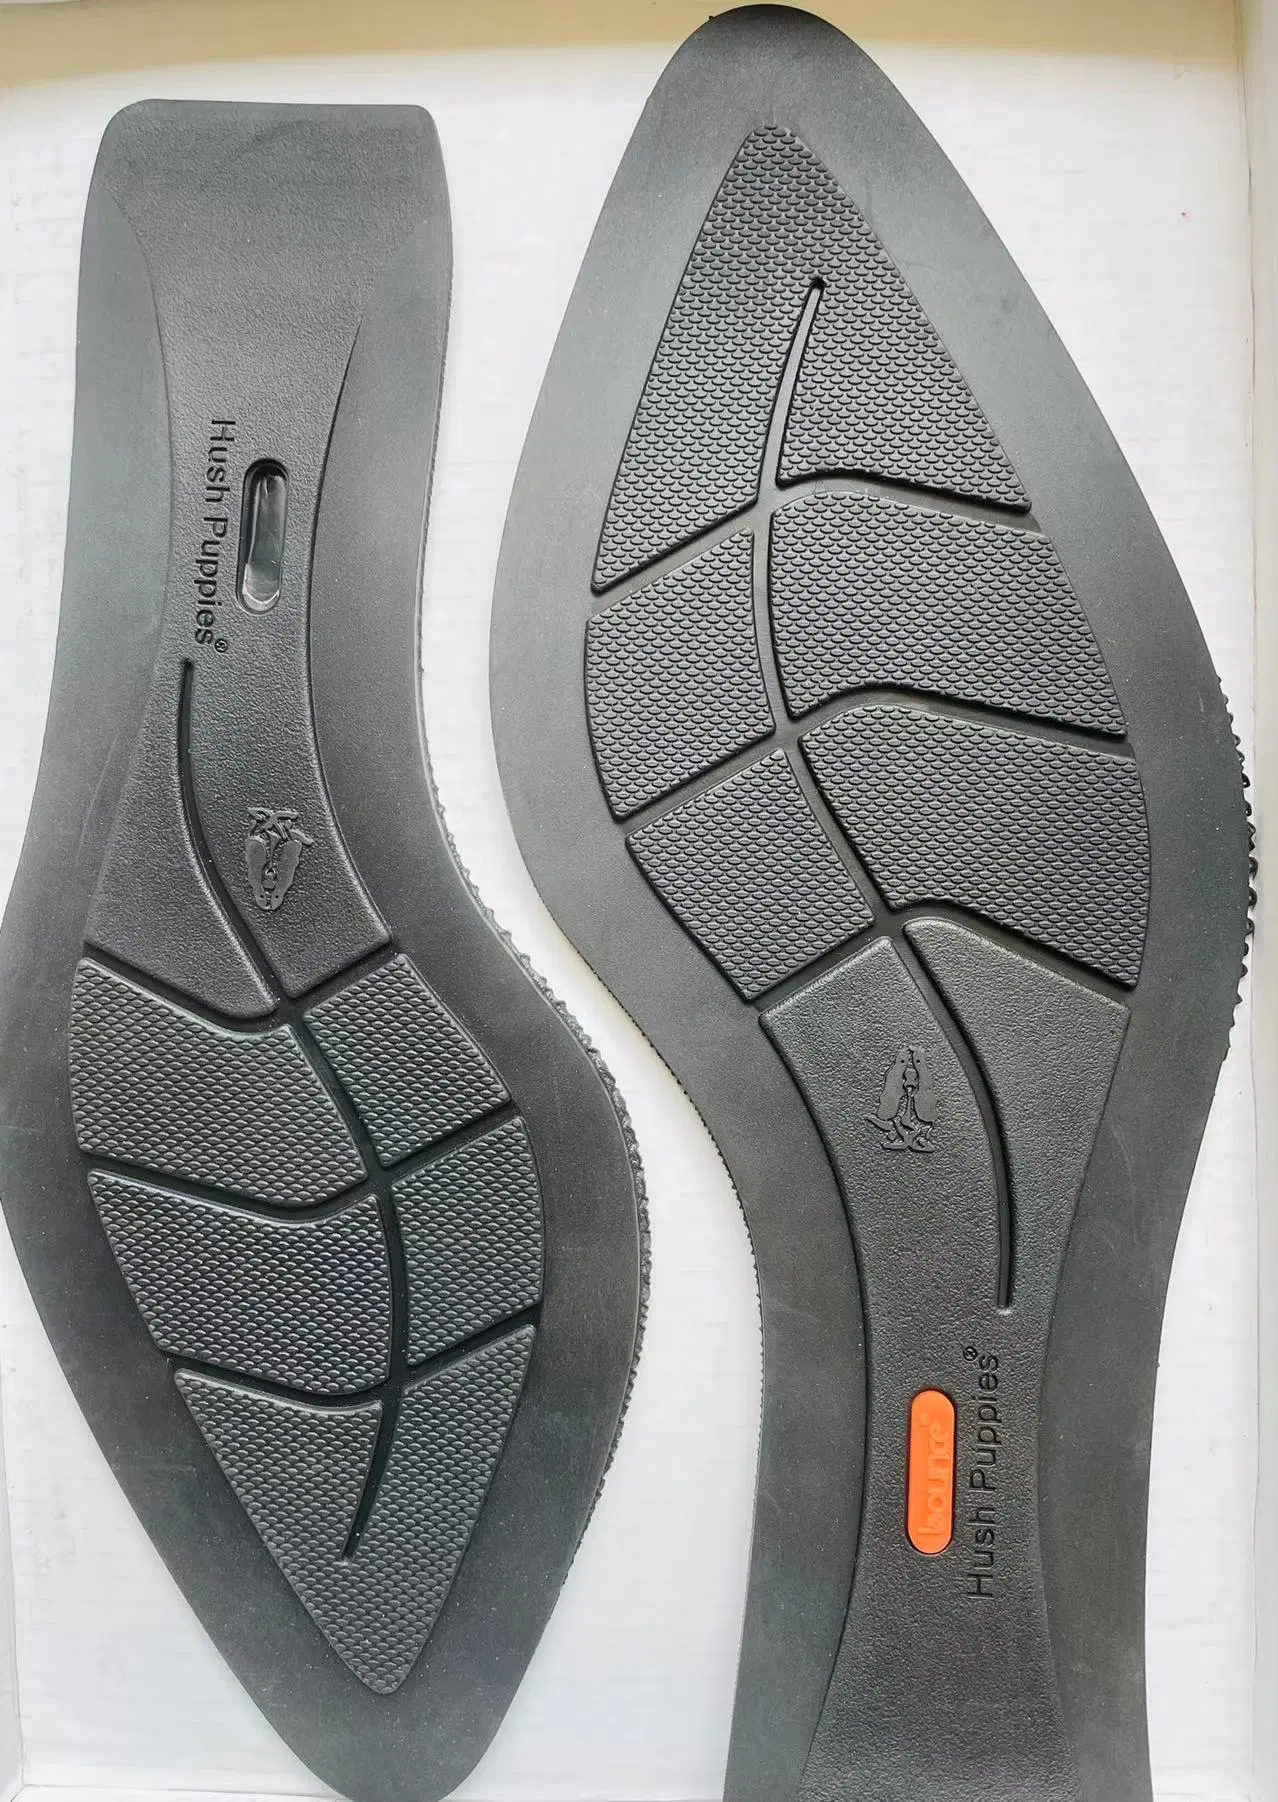 Outsole Factory Shoes Parts Accessories Rubber Sheet Shoe Outsole Material Sole Leather for Shoes Outsoles Shoe Sole Rubber Sheet for Sole